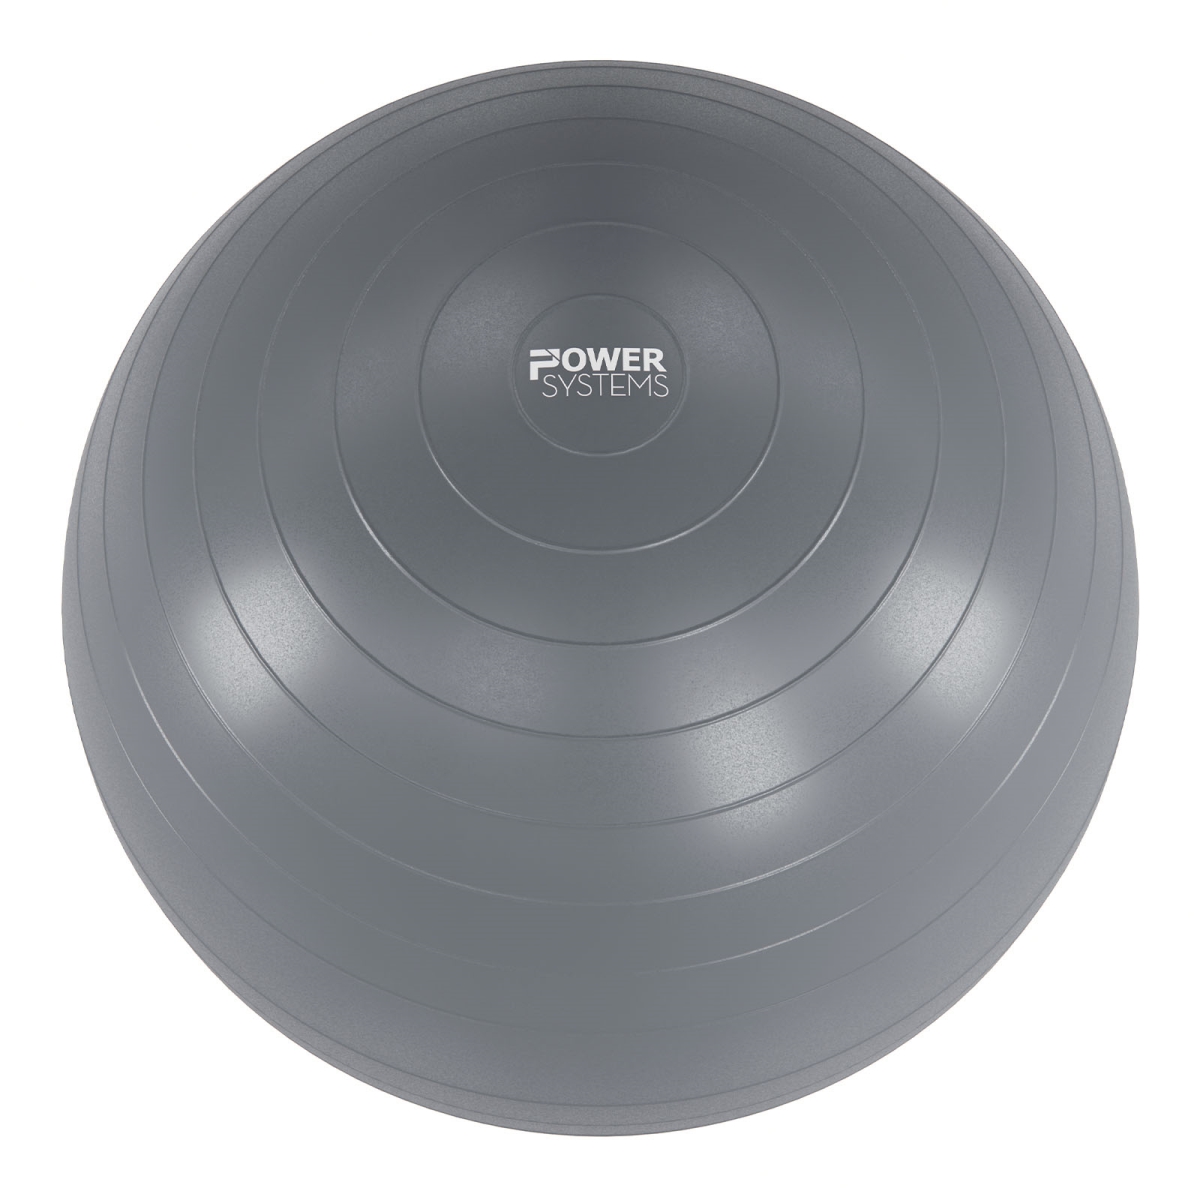 Picture of Power Systems 80756 VersaBall Pro 65cm - Gray